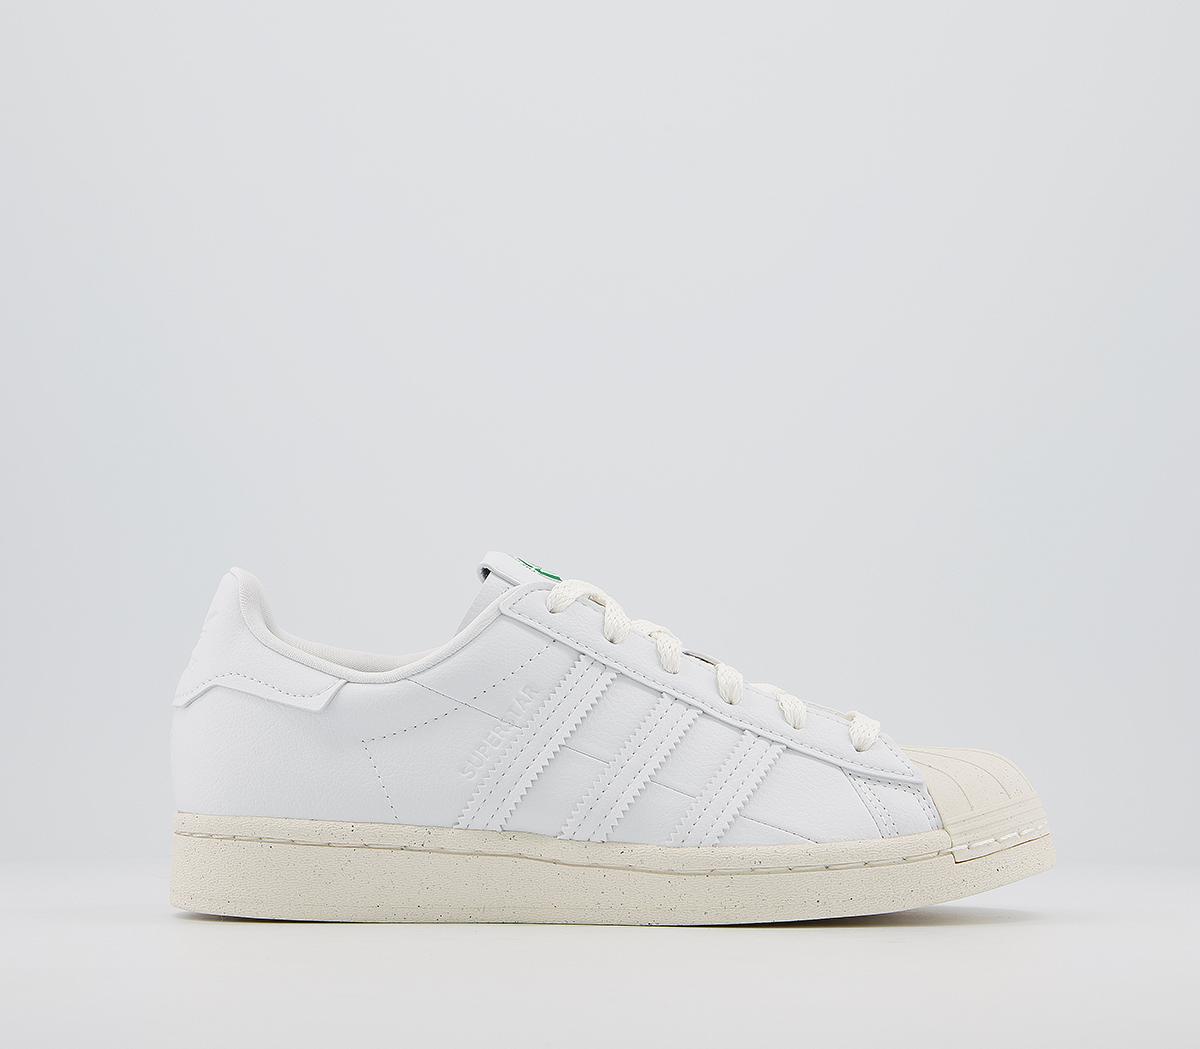 Adidas Superstar Clean Classics Trainers White Off White Green Sustainable Unisex Sports